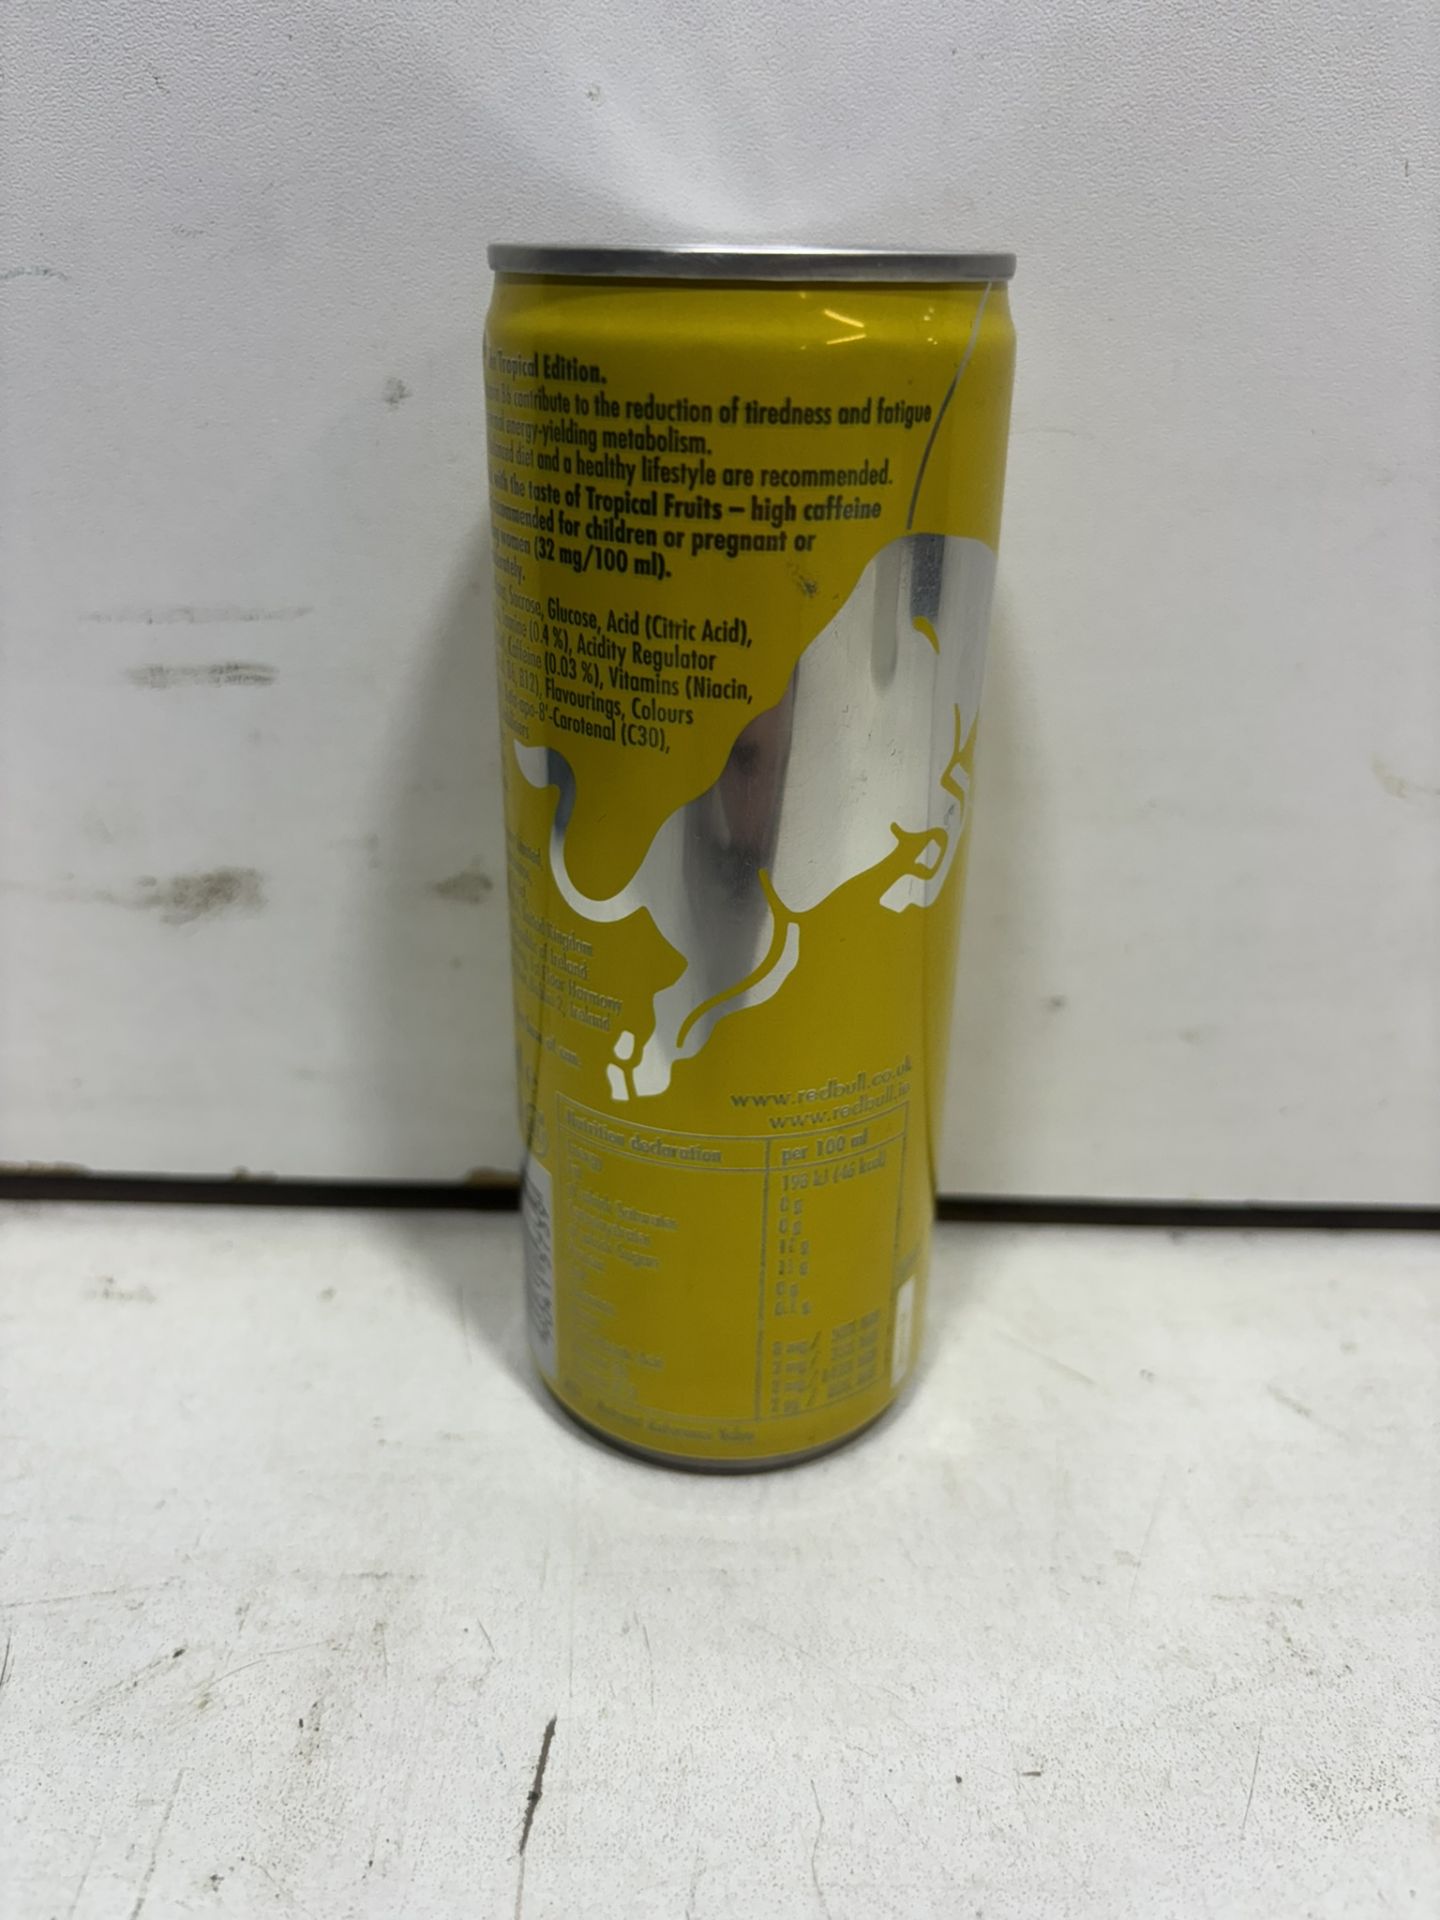 30 X Cans Of Red Bull 'The Tropical Edition' Tropical Fruits Energy Drinks, 250Ml - Image 2 of 7